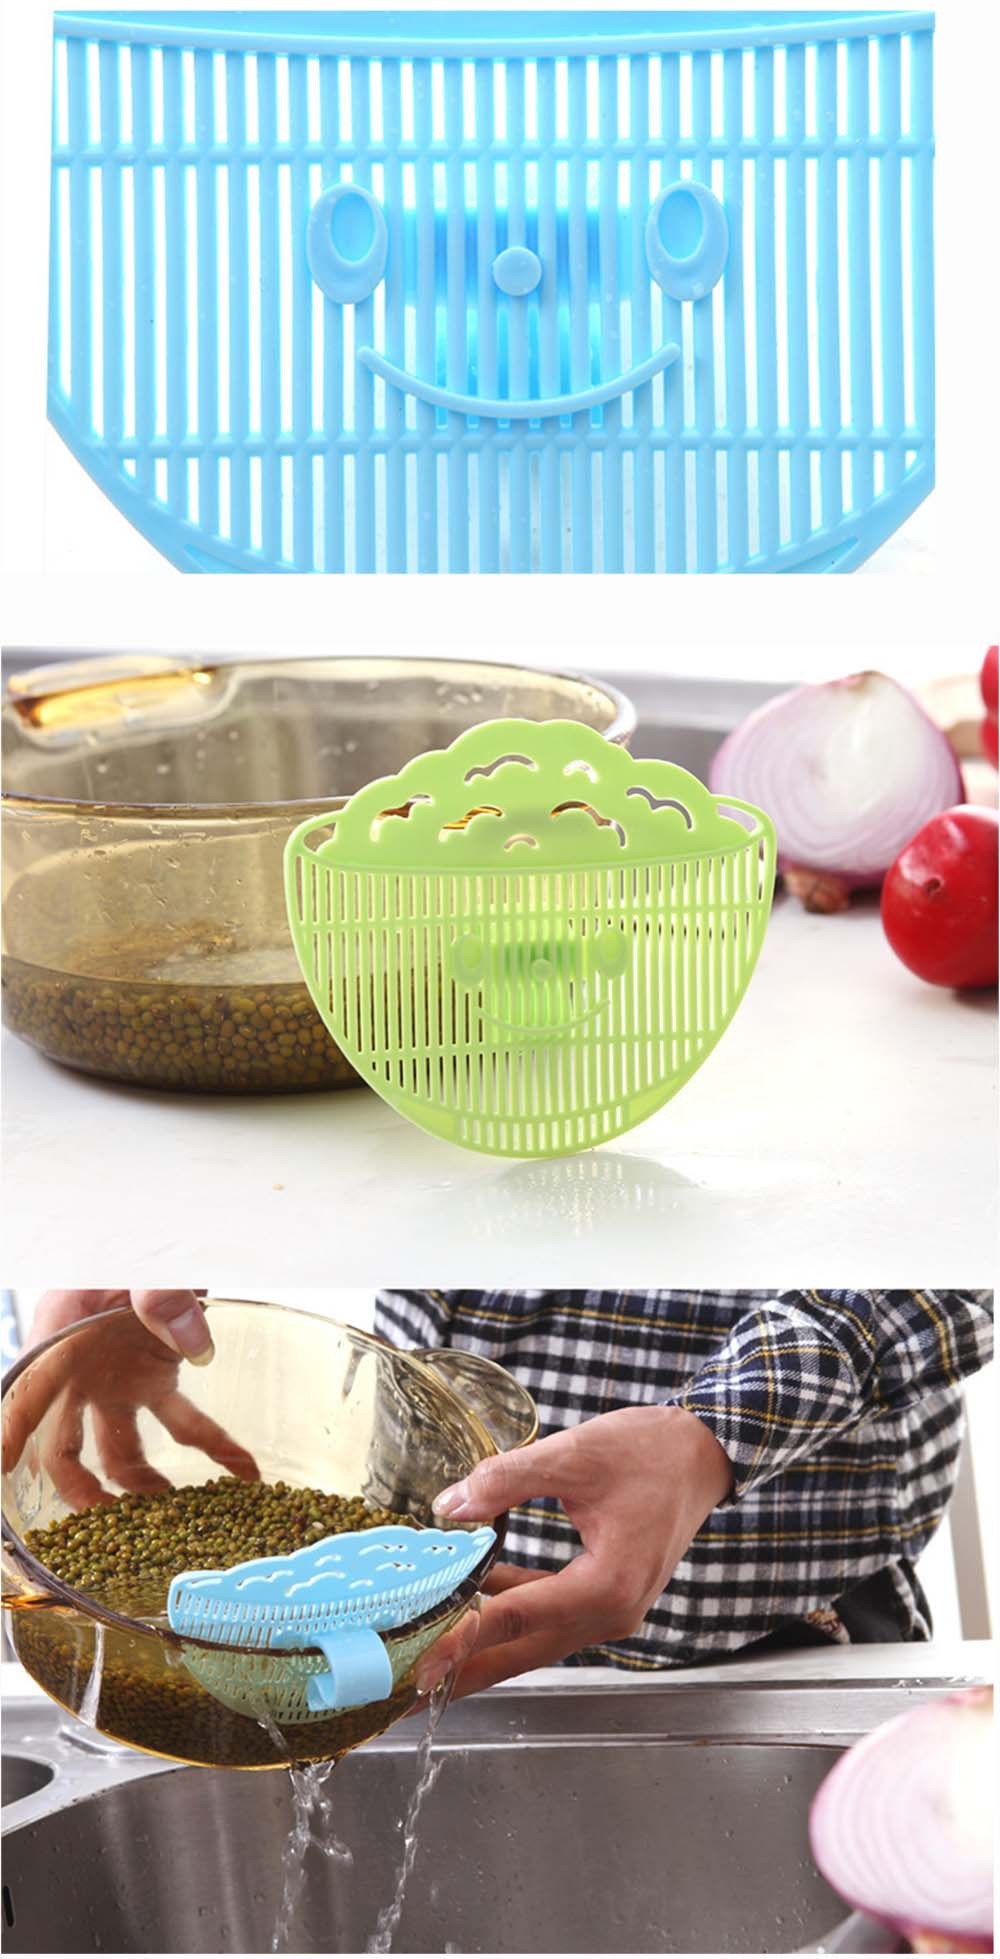 Plastic-Wash-Rice-Is-Rice-Washing-Not-To-Hurt-The-Hand-Clean-Wash-Rice-Sieve-Manual-Smile-Can-Clip-Type-Manual-Kitchen-Cooking-Tools-KC1080 (7)